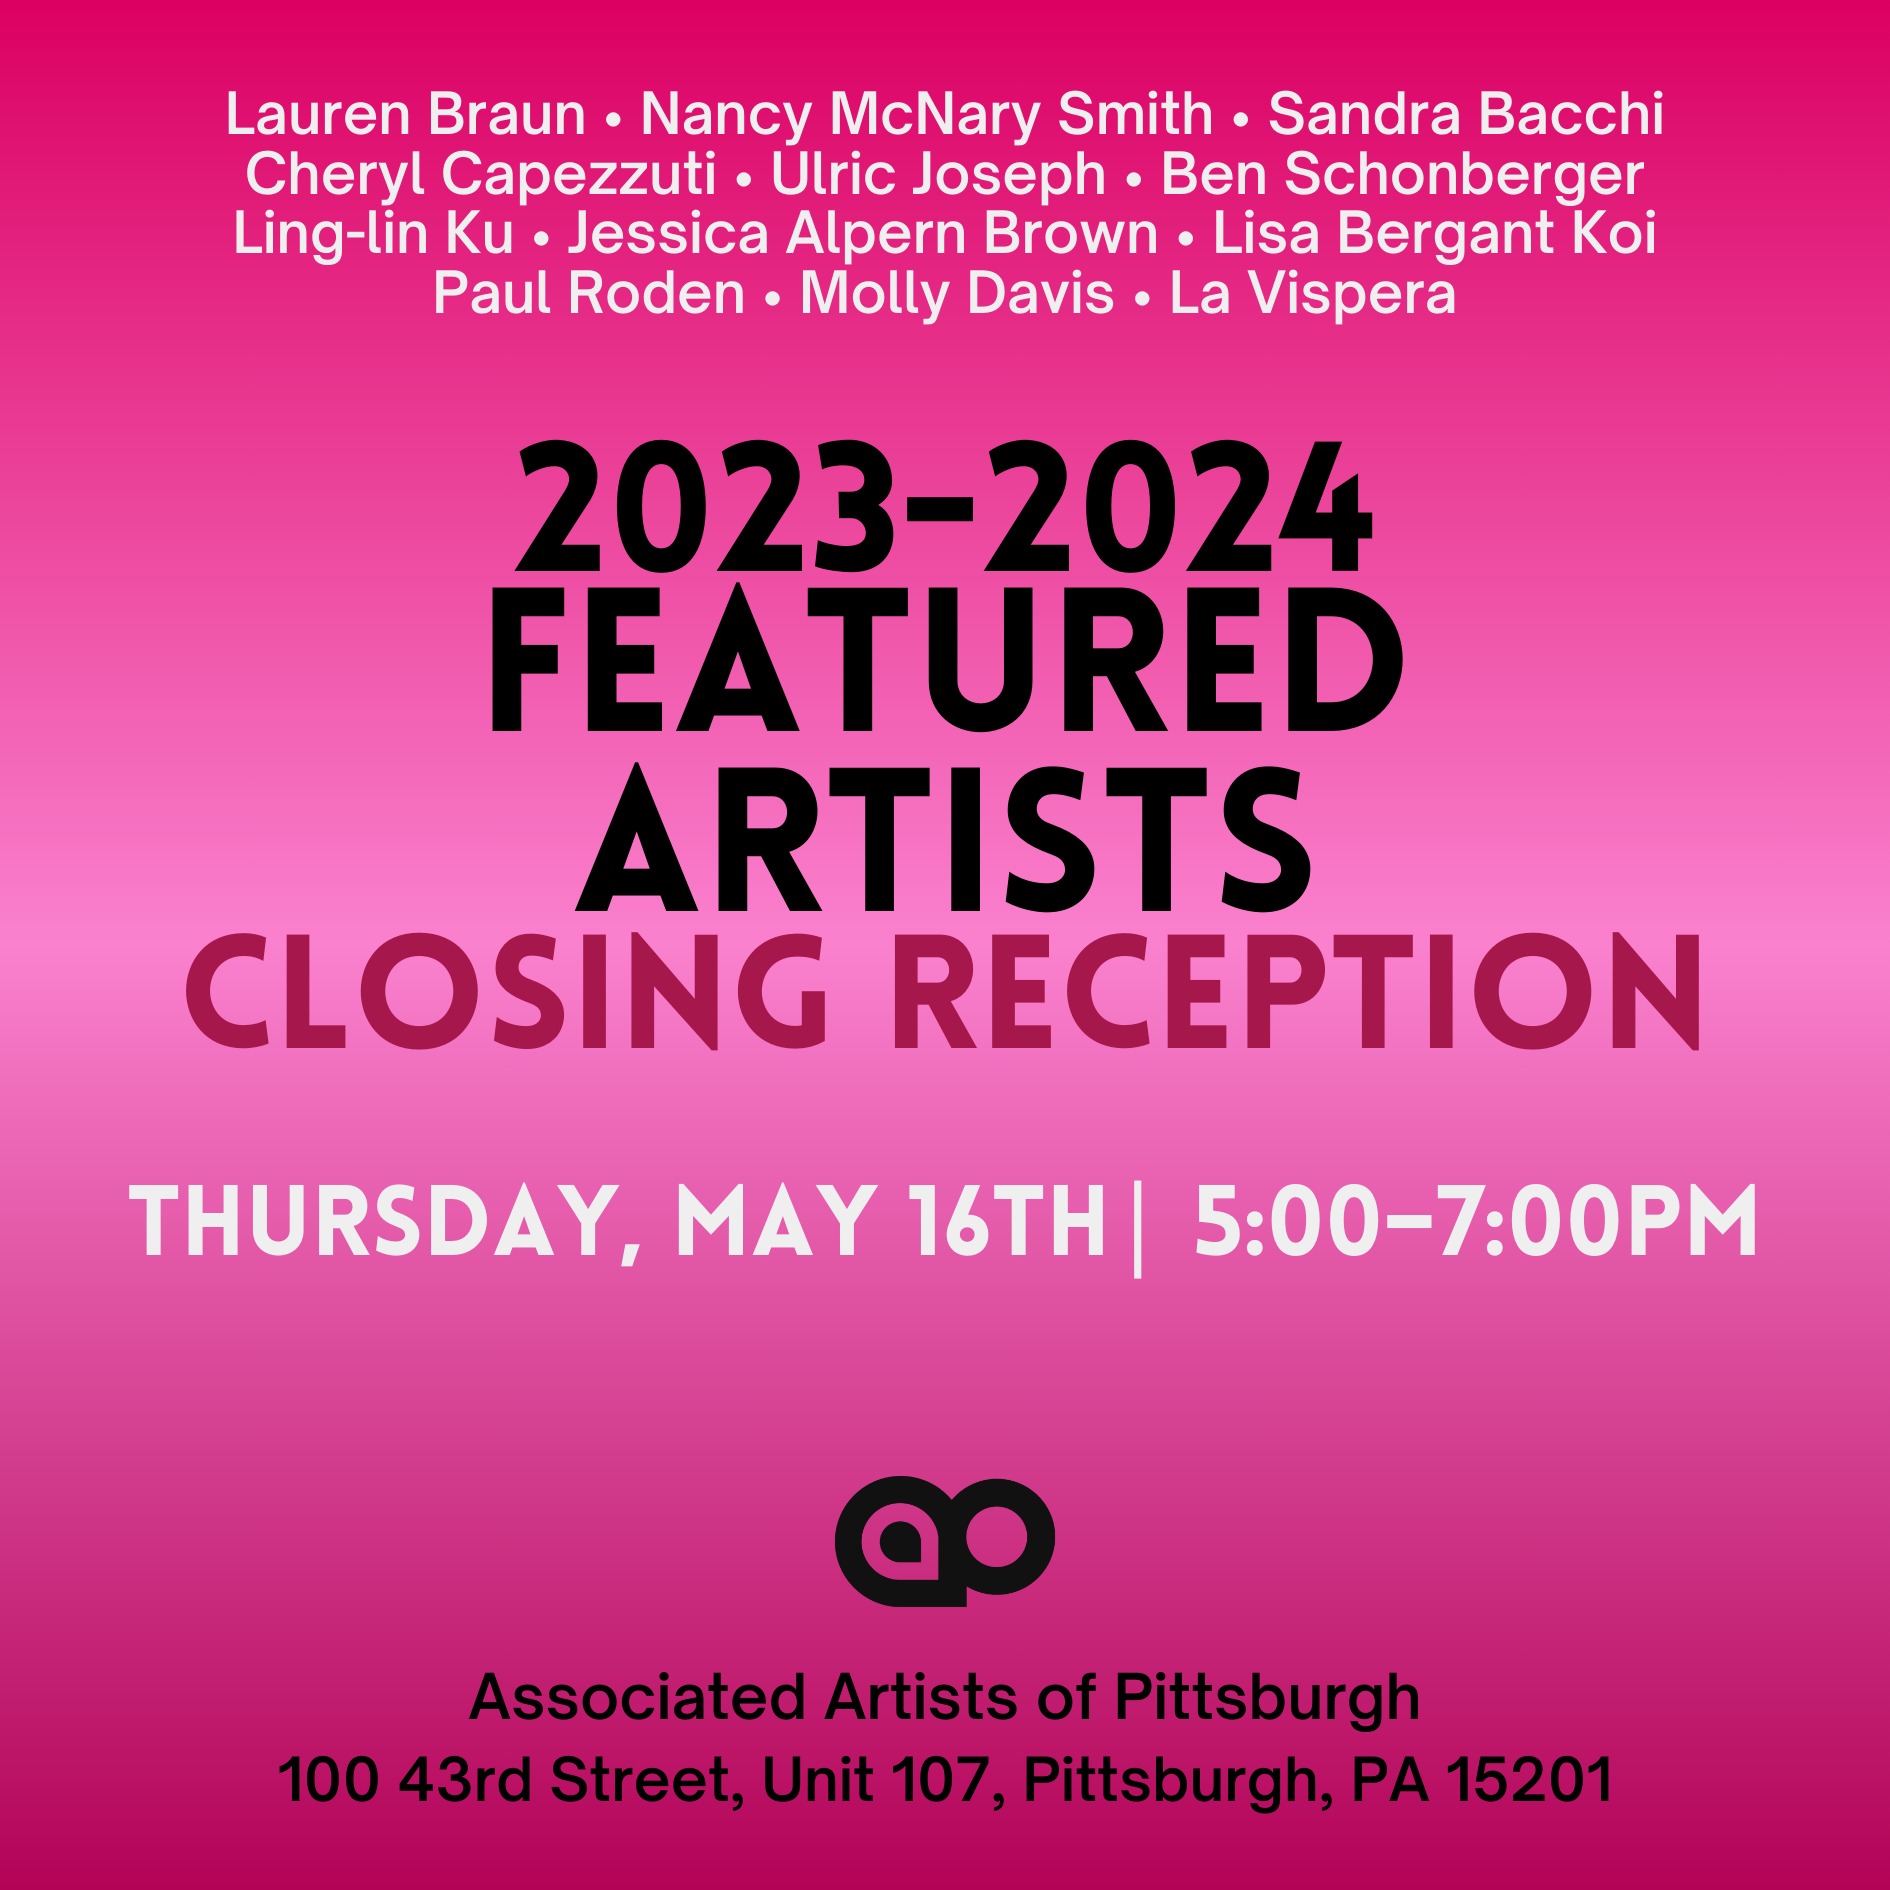 2023-2024 Featured Artists Closing Reception - Thursday, May 16th - 5:00-7:00 PM - Associated Artists of Pittsburgh - 100 43rd Street, Unit 107, Pittsburgh, PA 15201